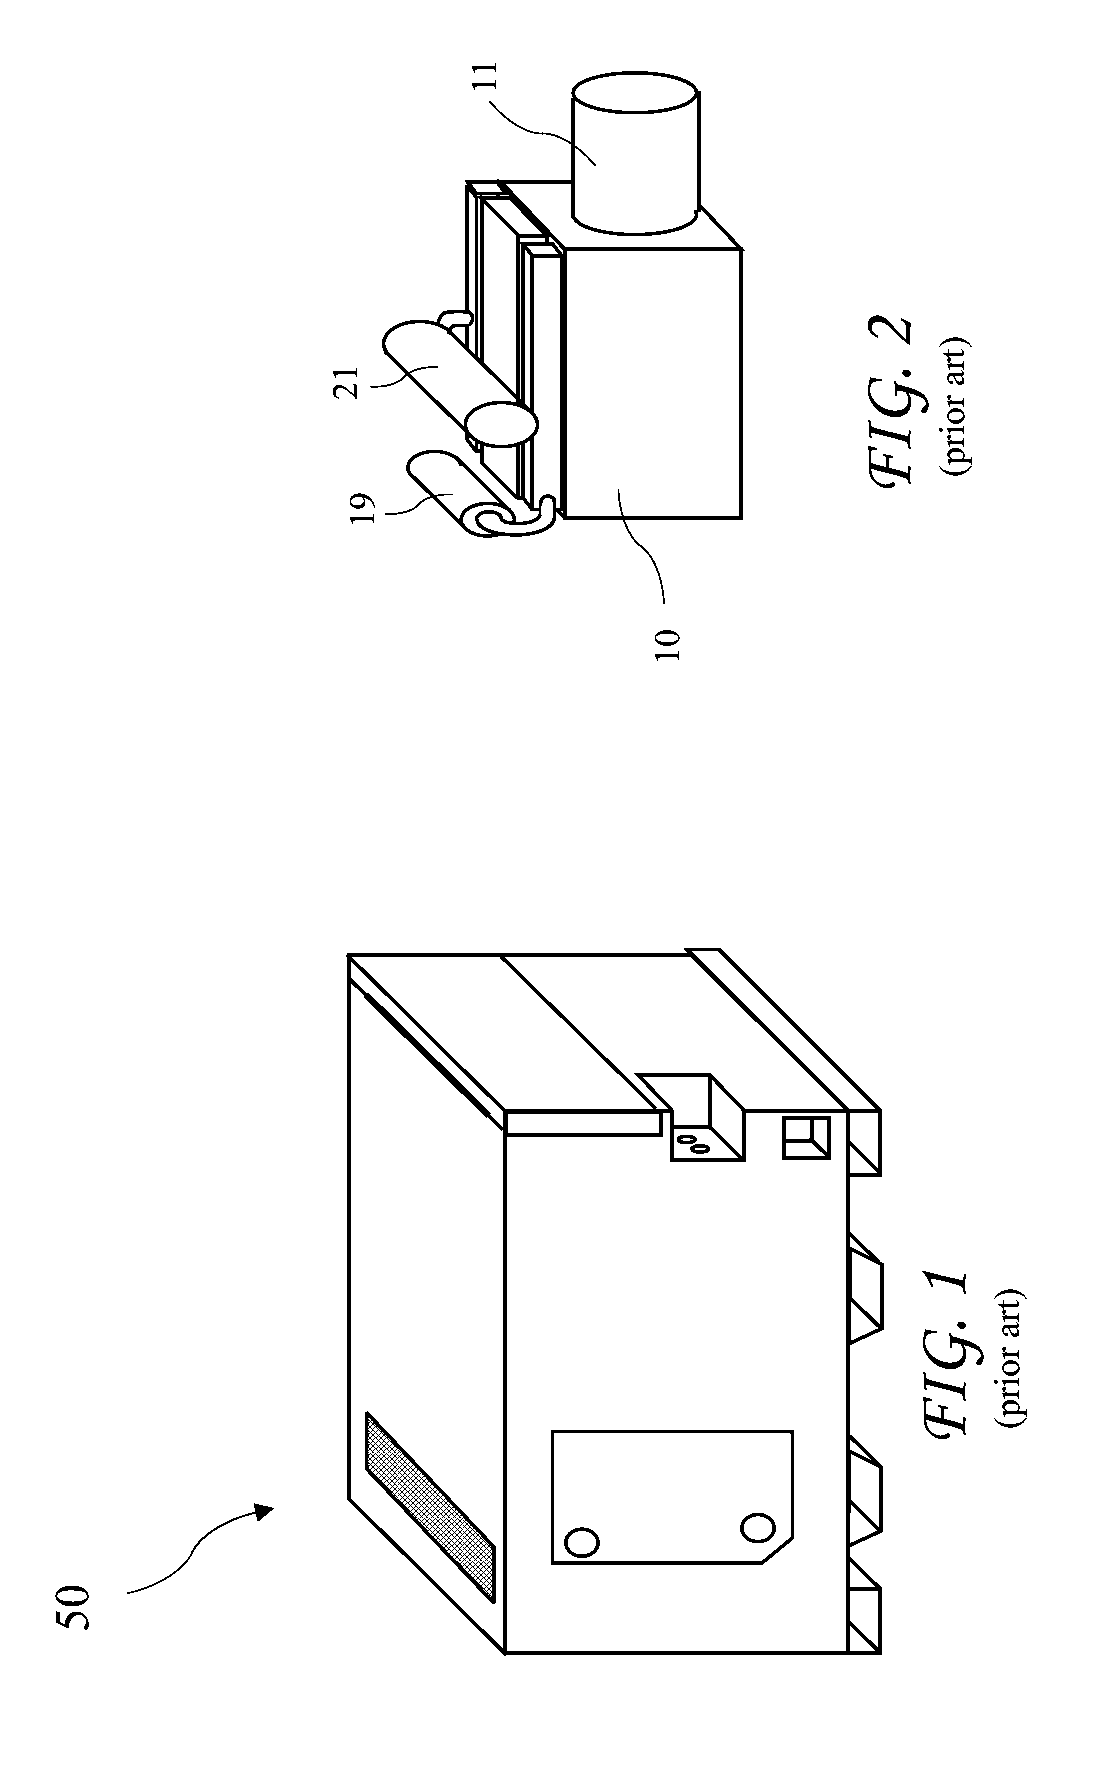 Apparatus and method for field modification of a diesel generator to improve efficiency